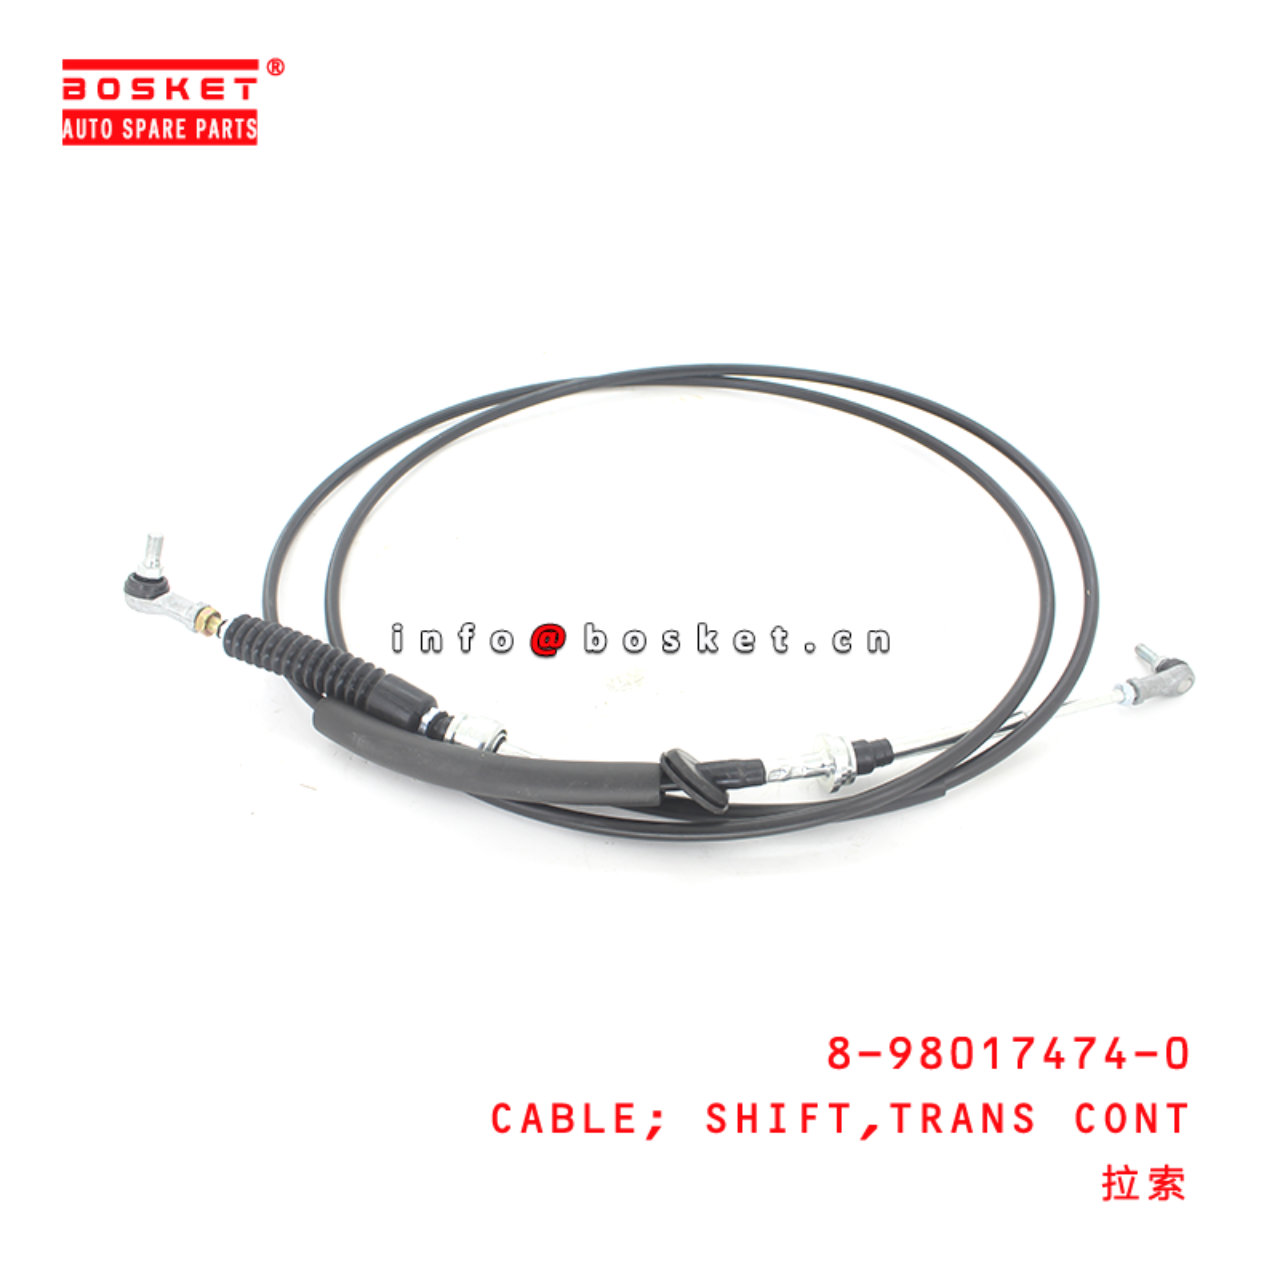 8-98017474-0 Transmission Control Shift Cable Suitable for ISUZU FVR 8980174740